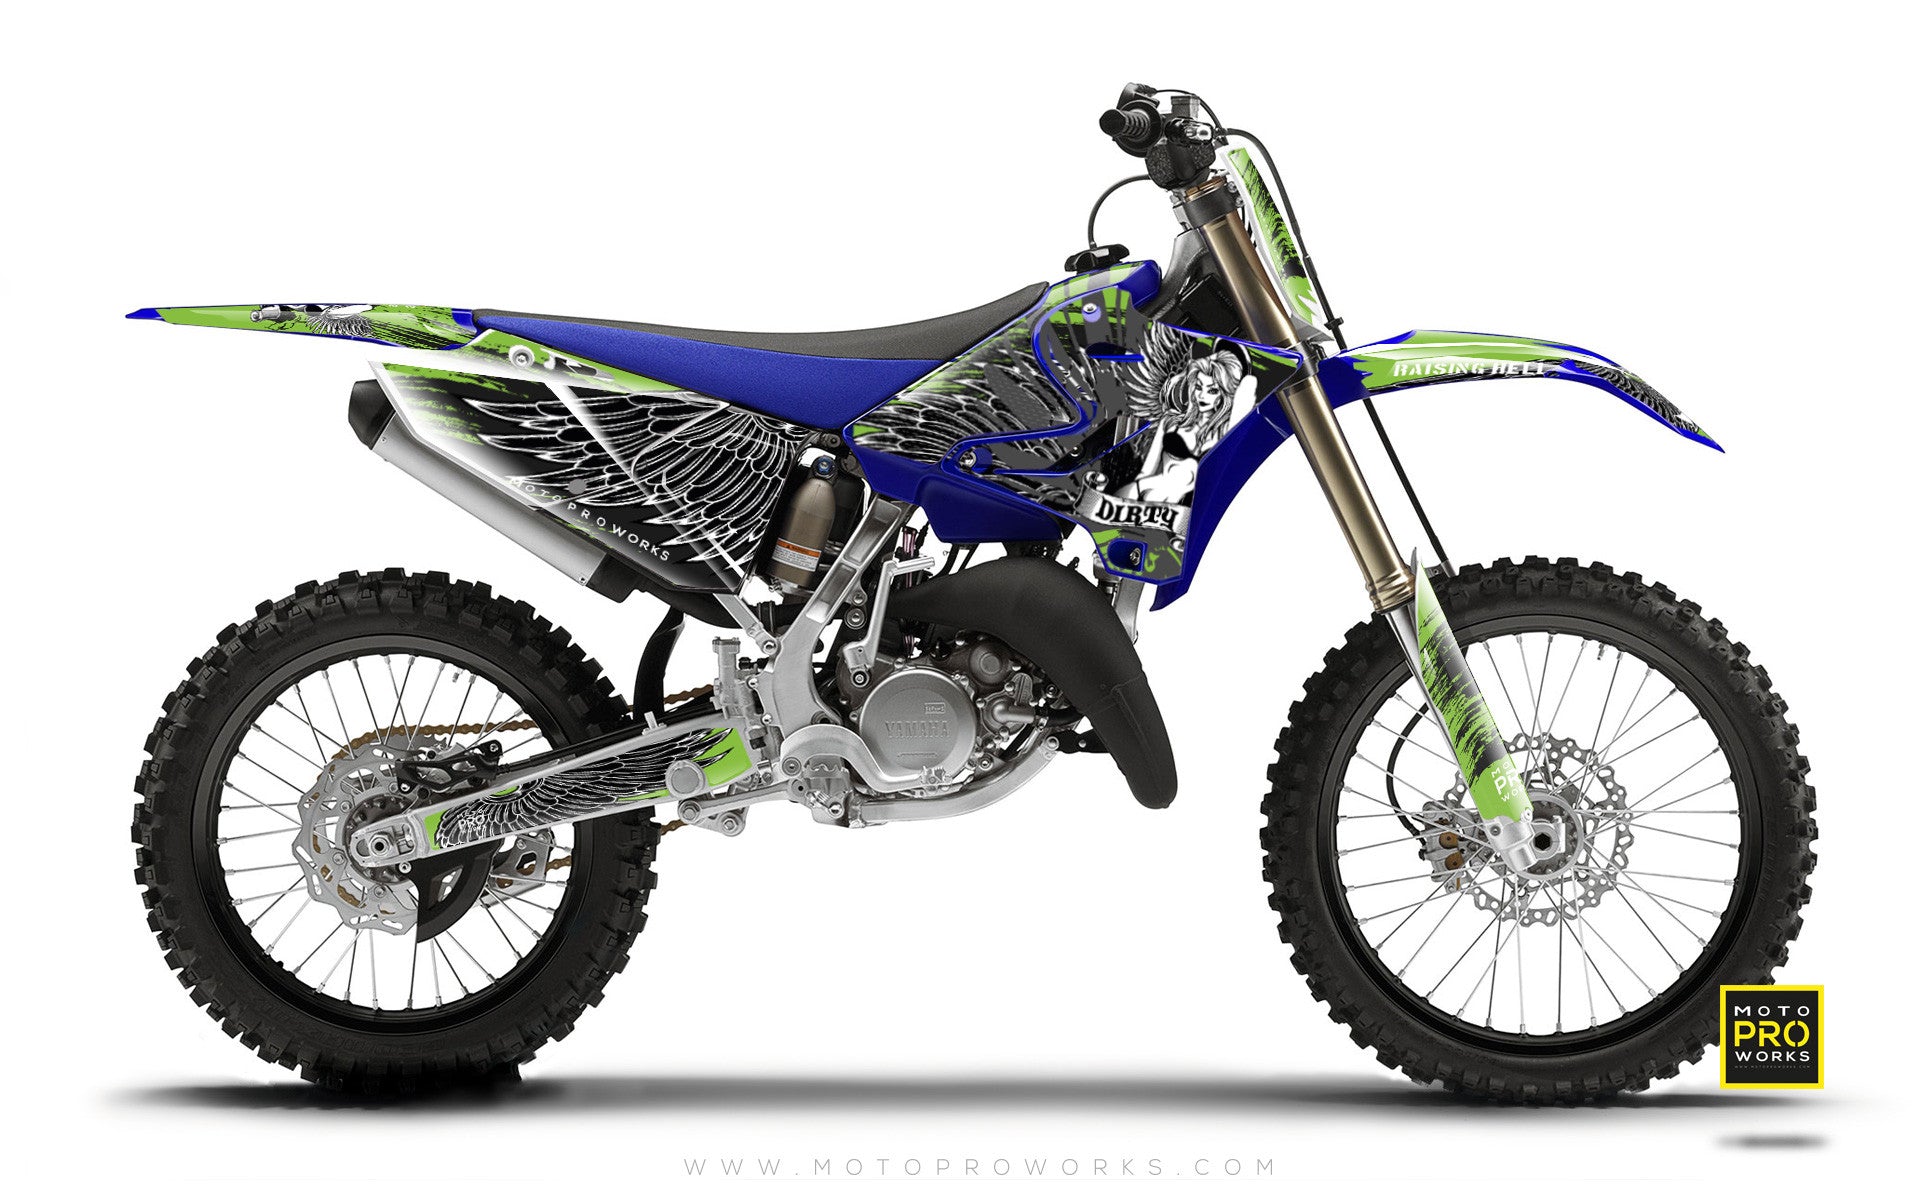 Yamaha GRAPHIC KIT - "Dirty Angel" (green) - MotoProWorks | Decals and Bike Graphic kit